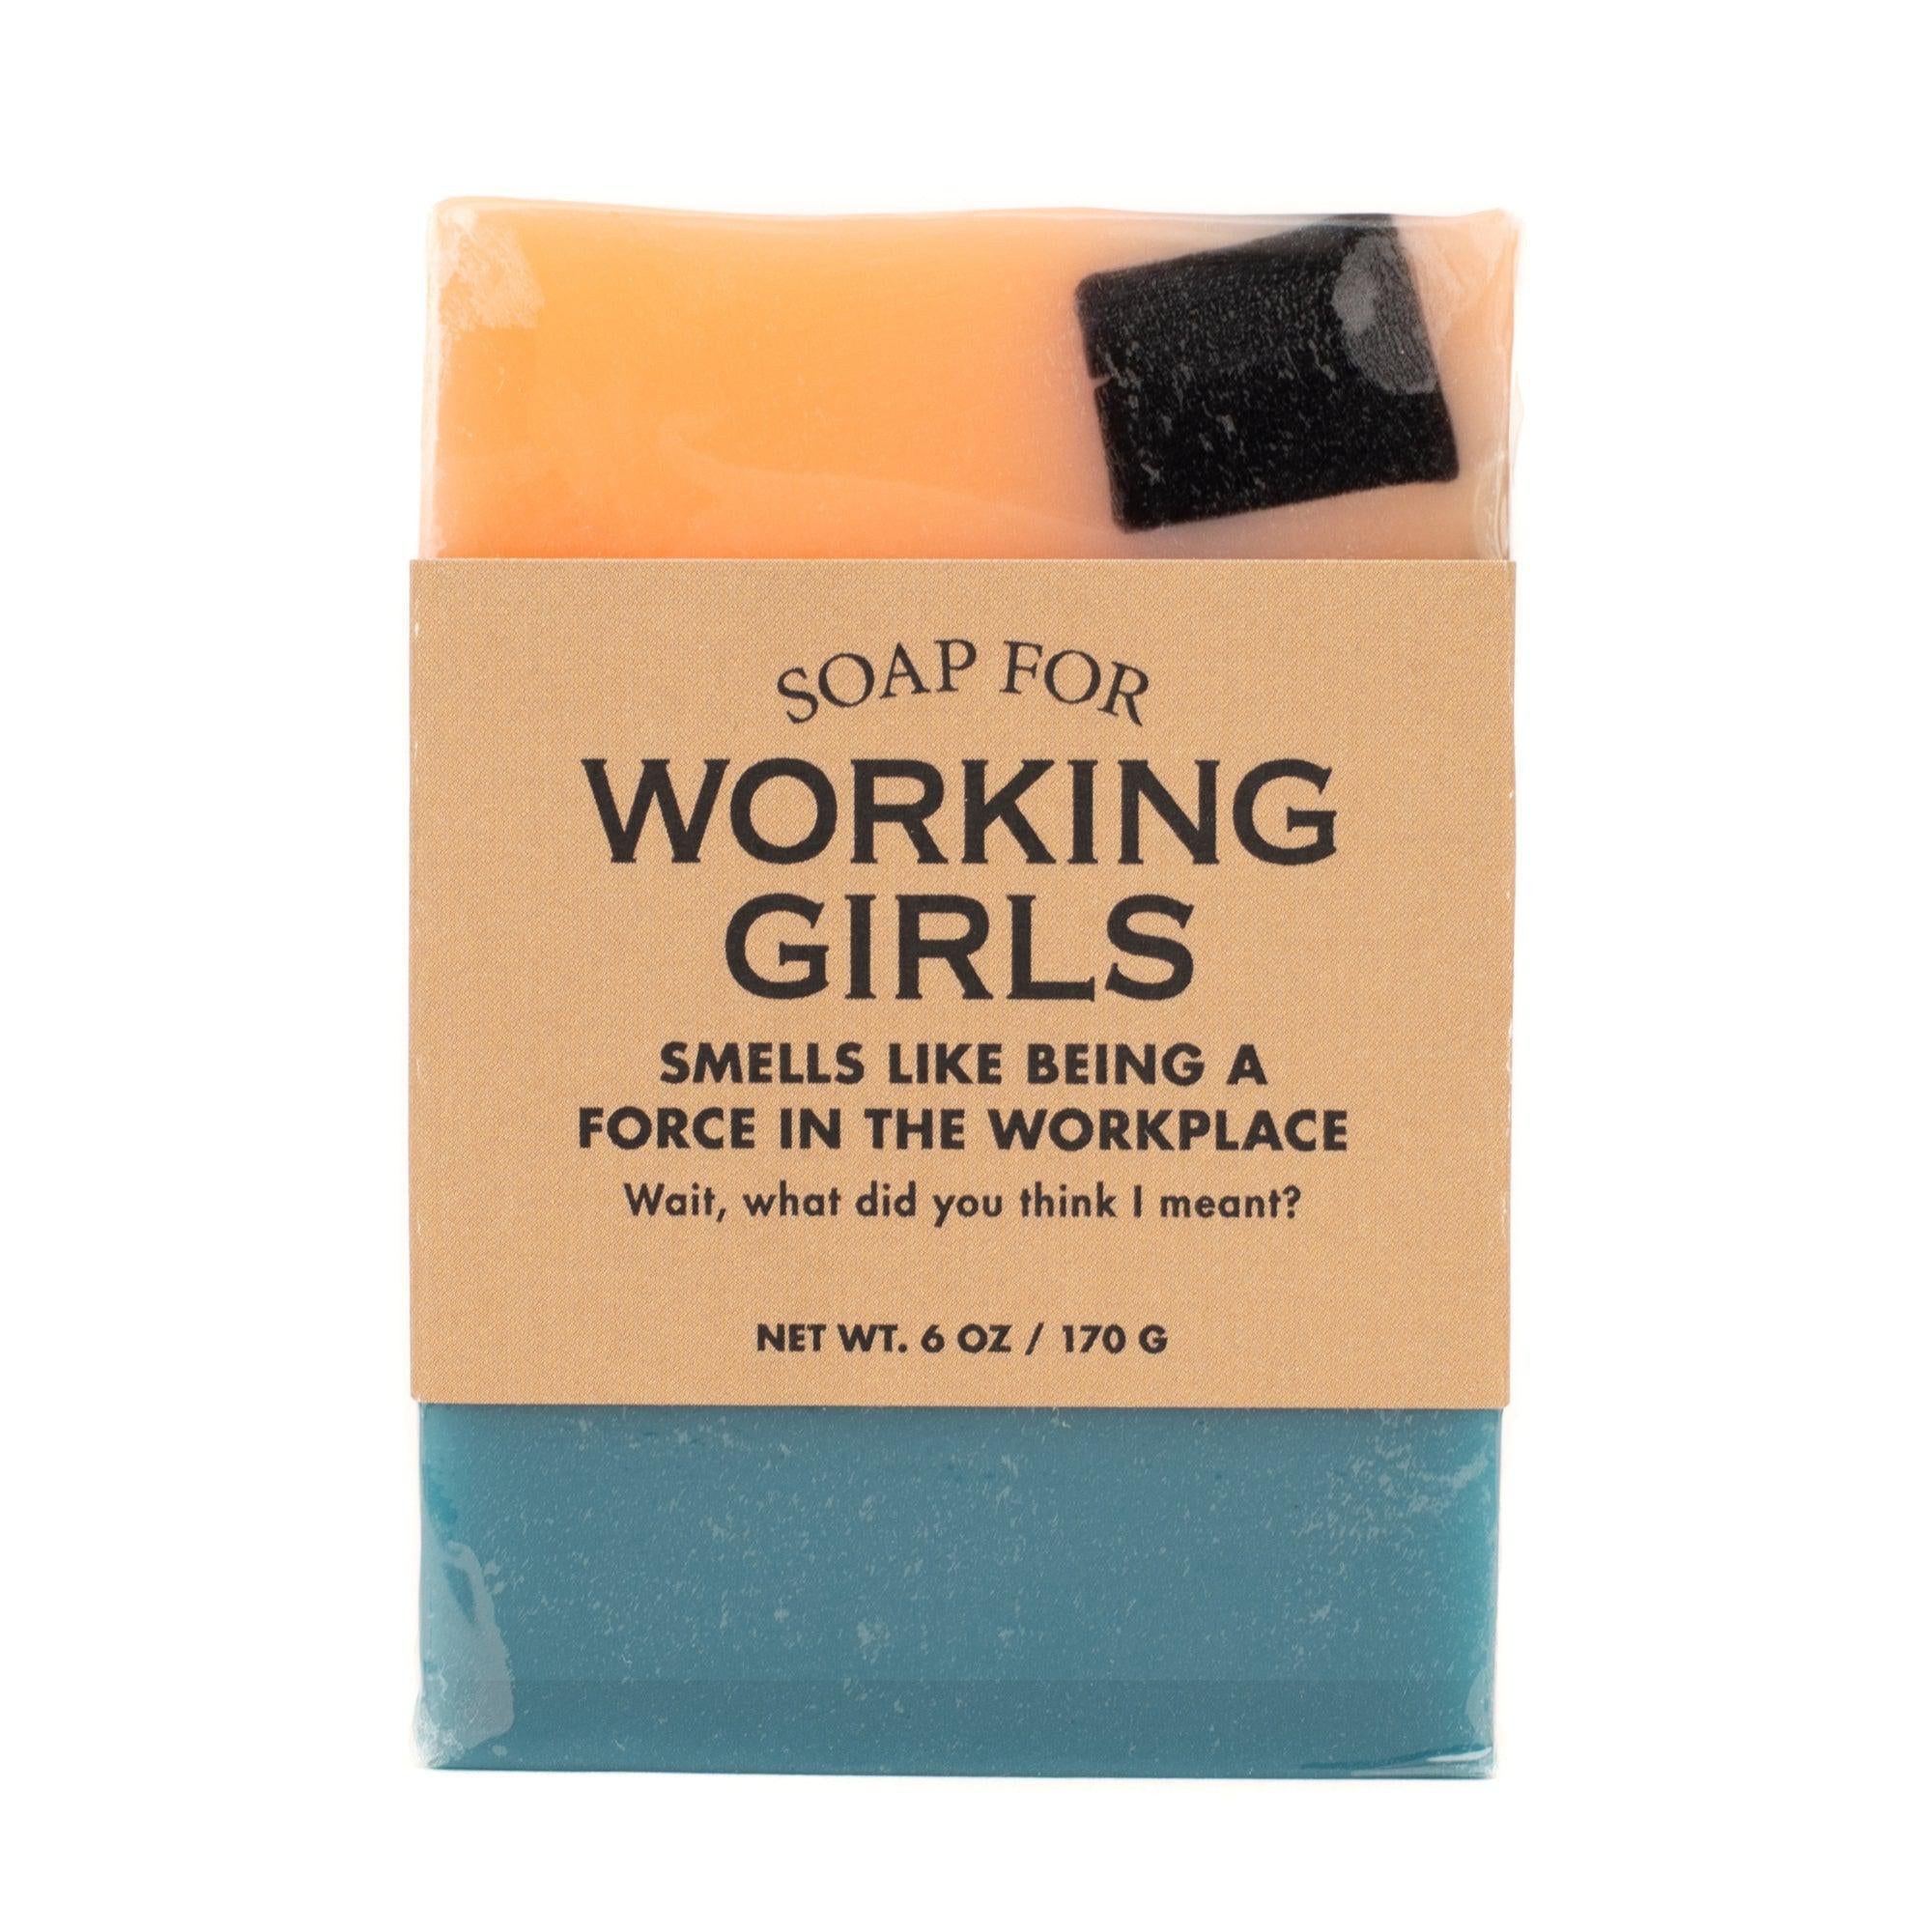 A Soap For Working Girls